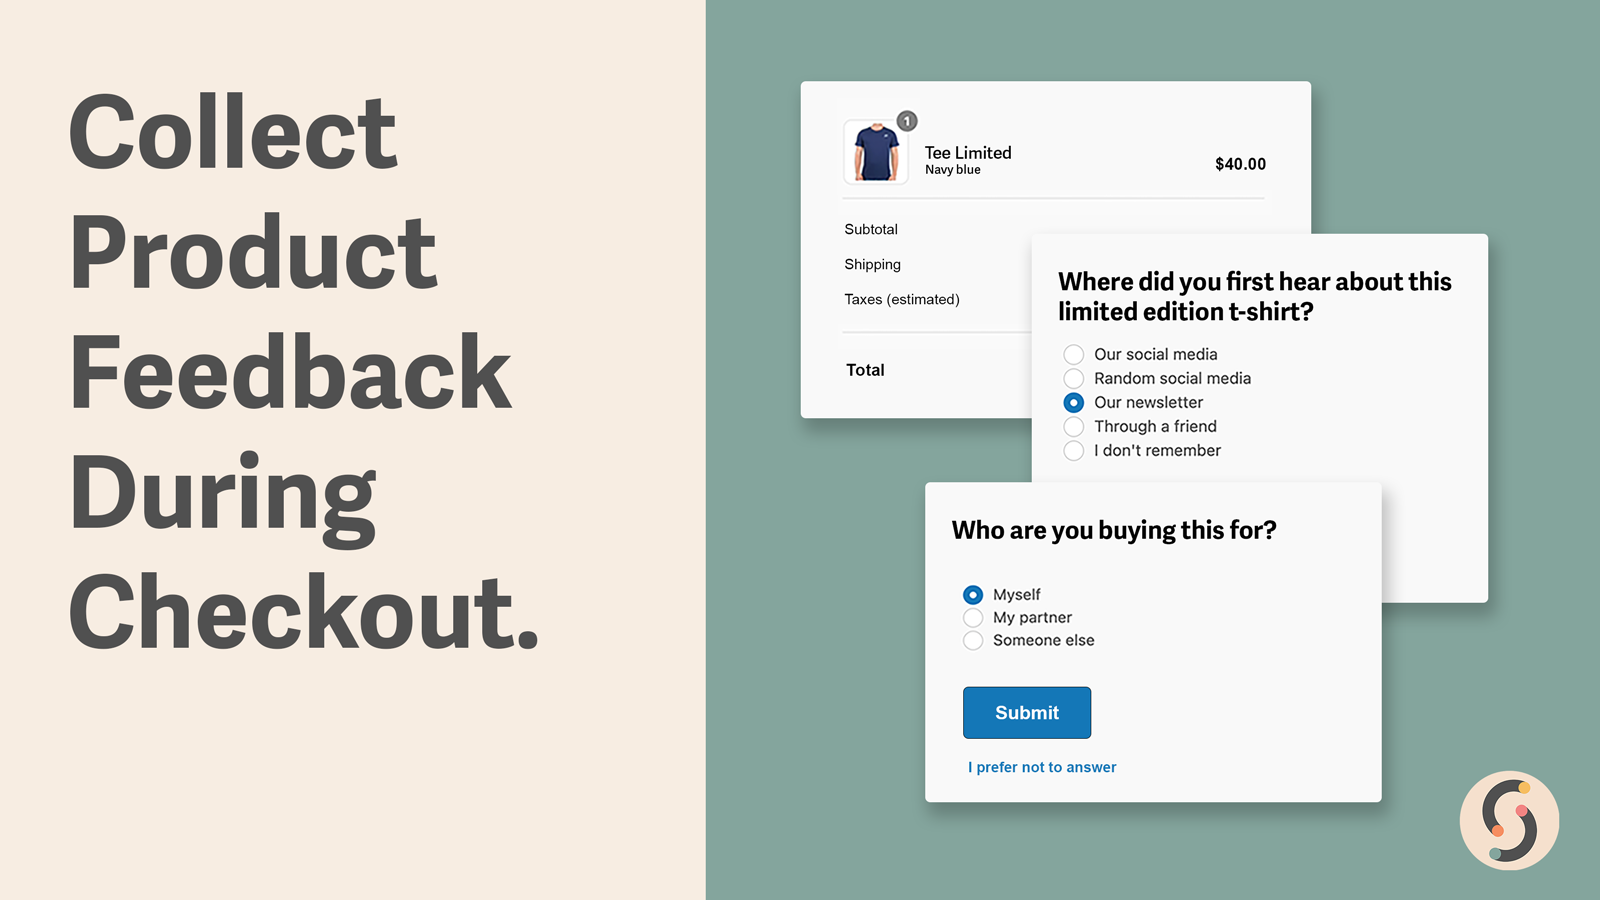 Collect Product Feedback During Checkout.